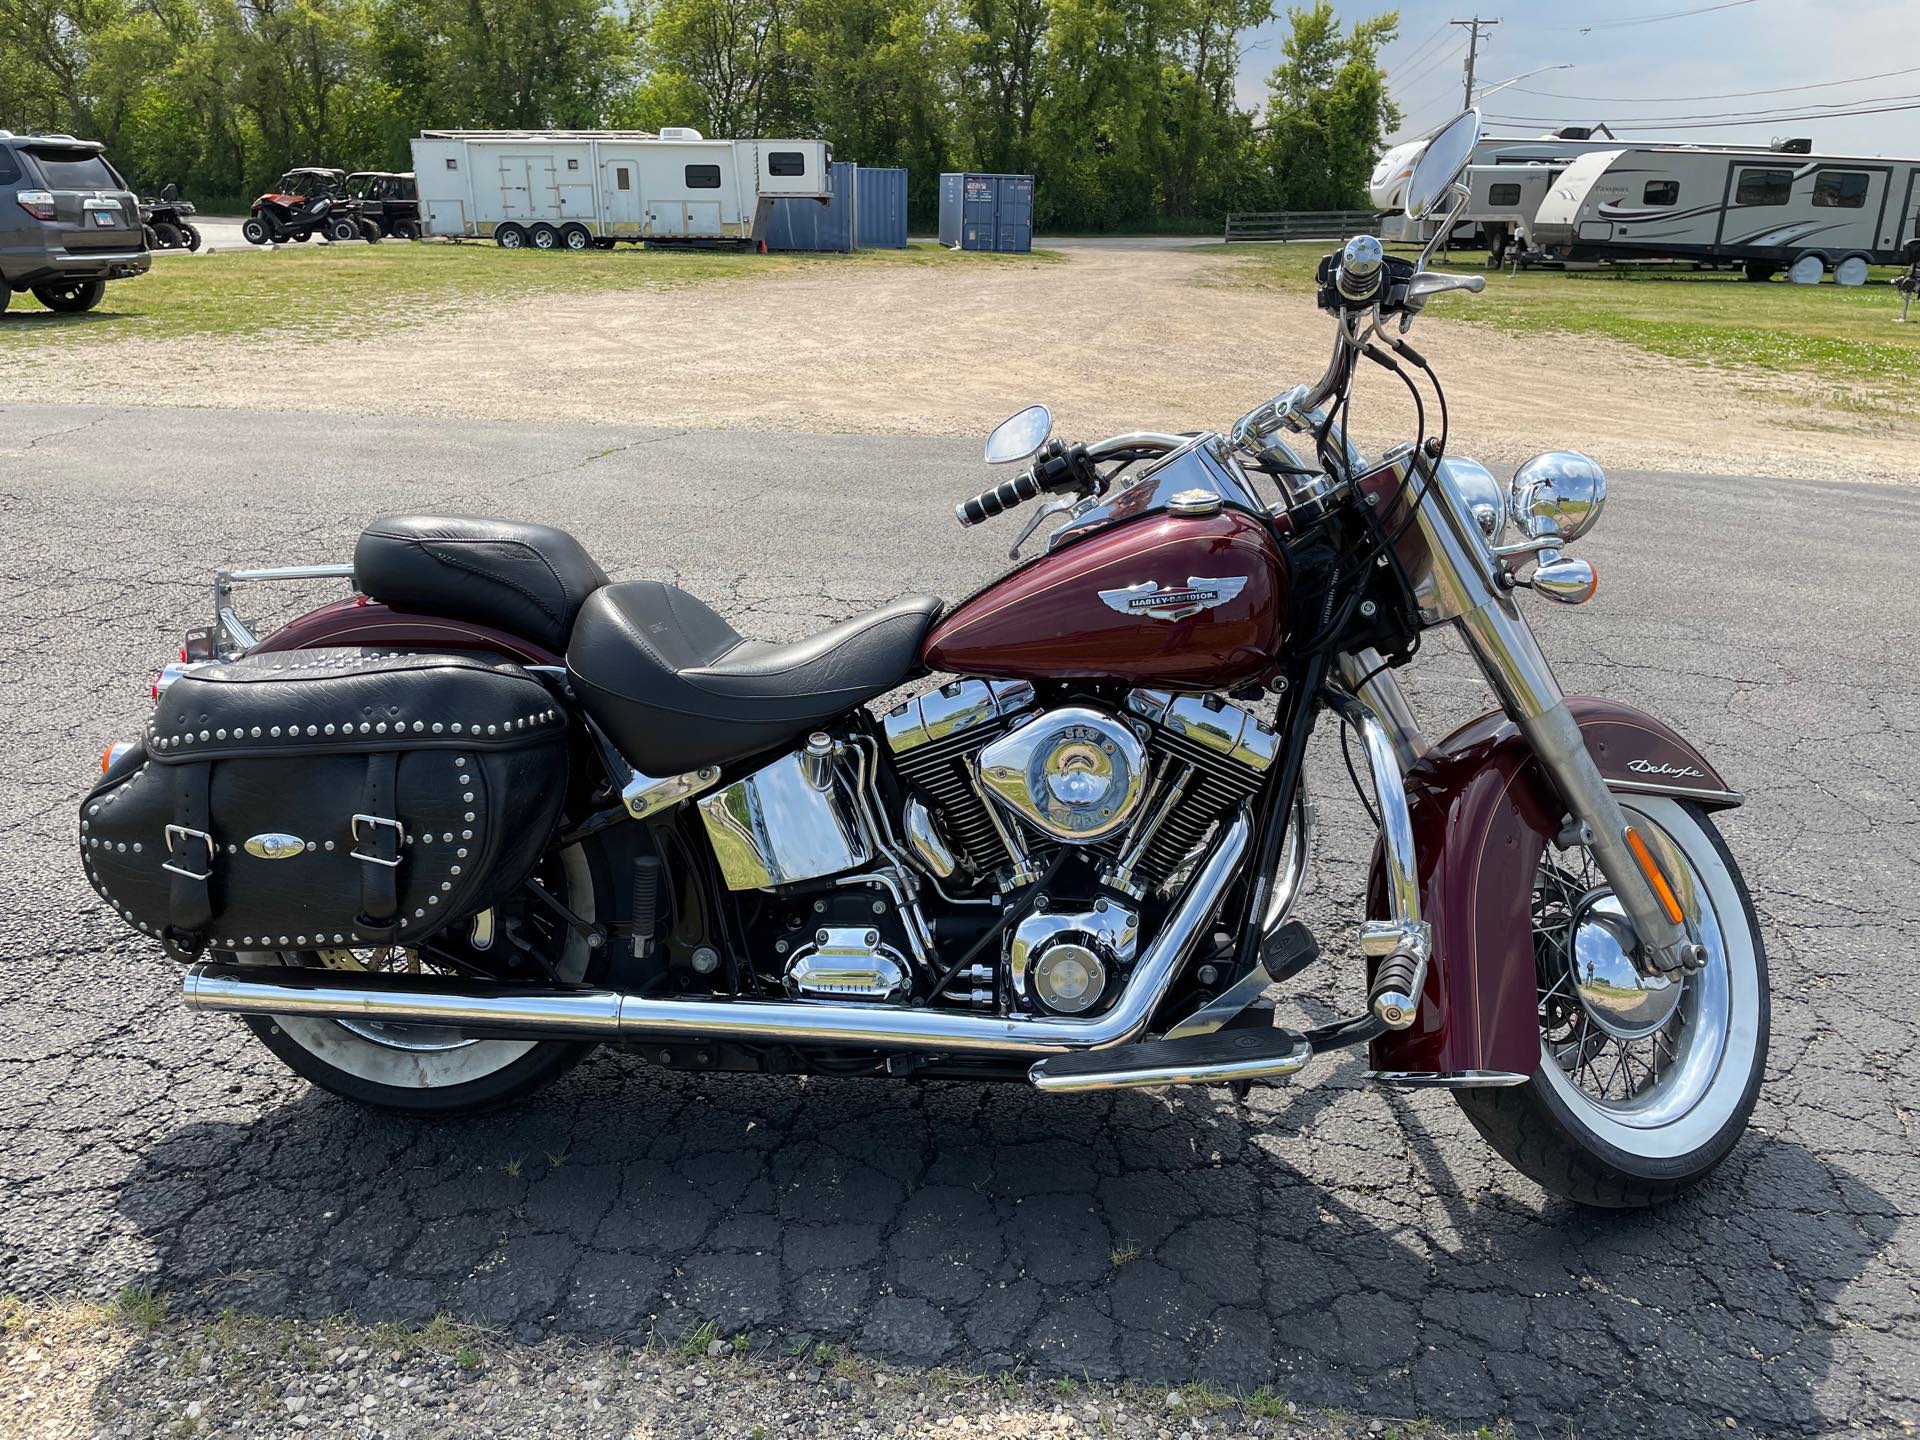 2008 Harley-Davidson Softail Deluxe at Randy's Cycle